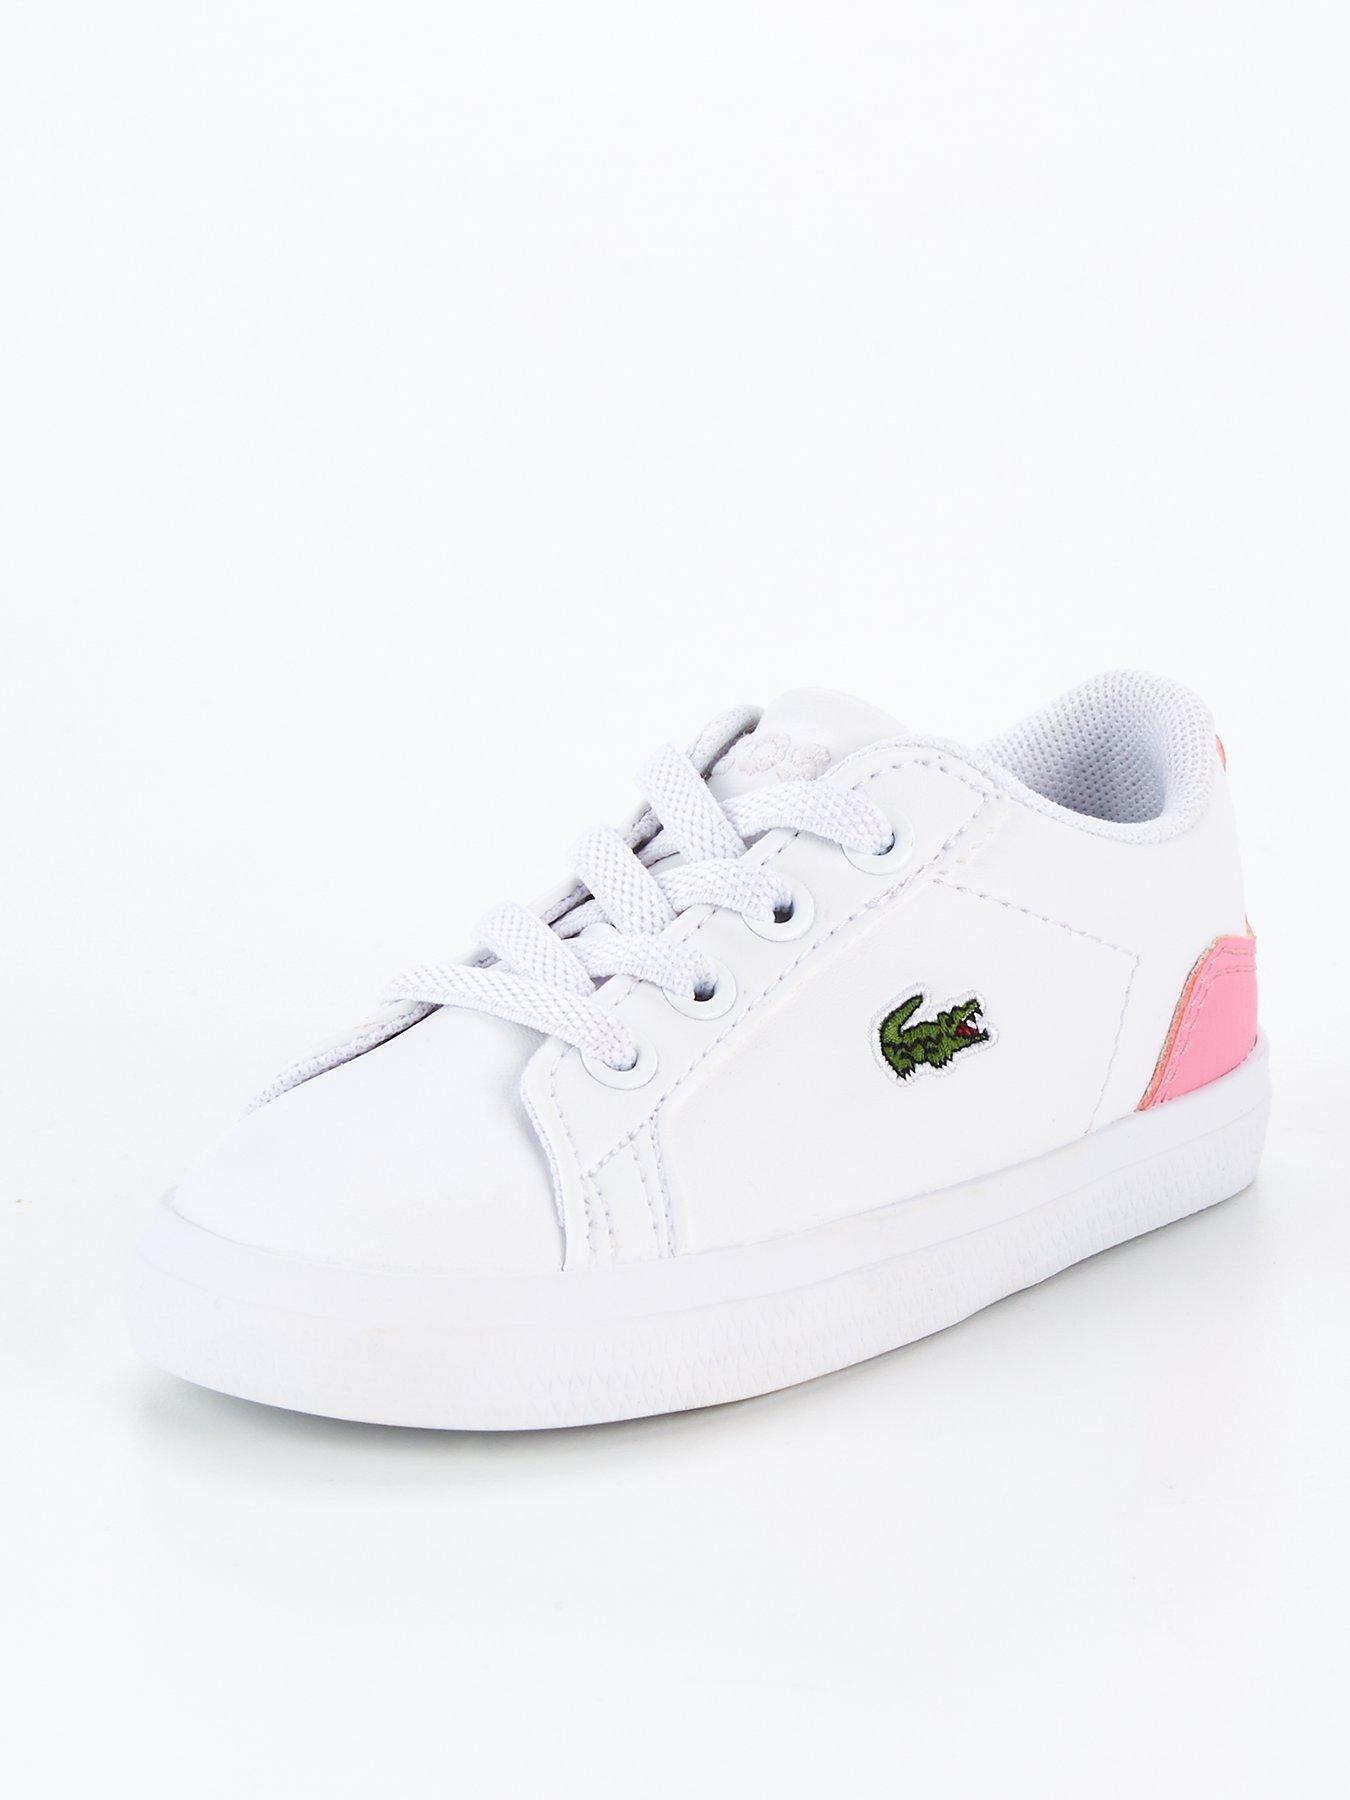 lacoste runners